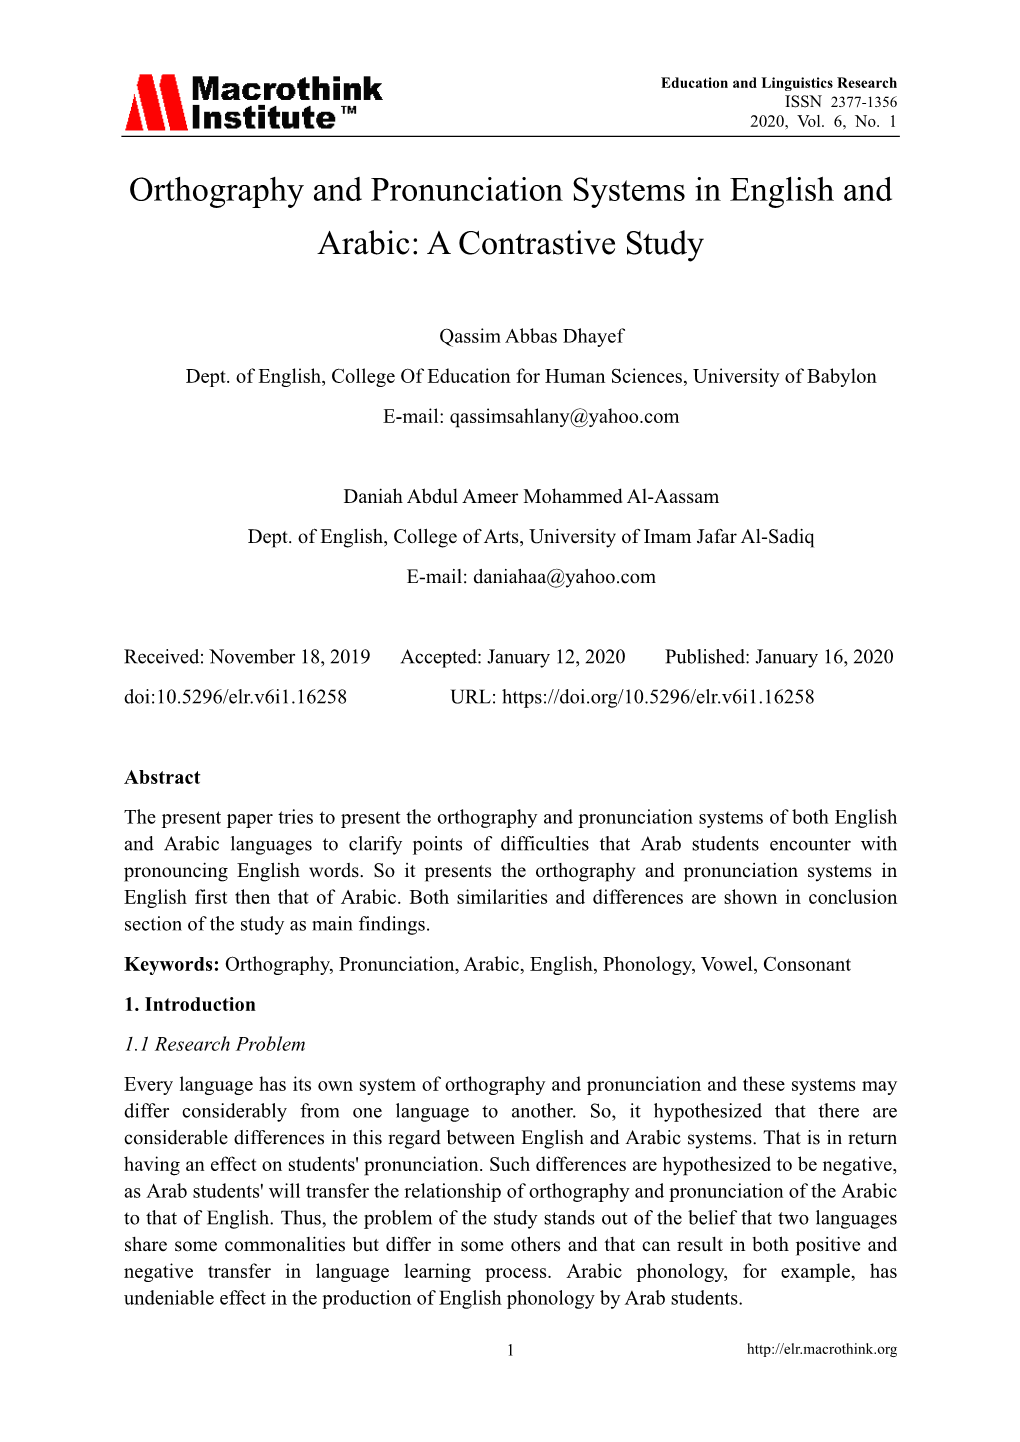 Orthography and Pronunciation Systems in English and Arabic: a Contrastive Study